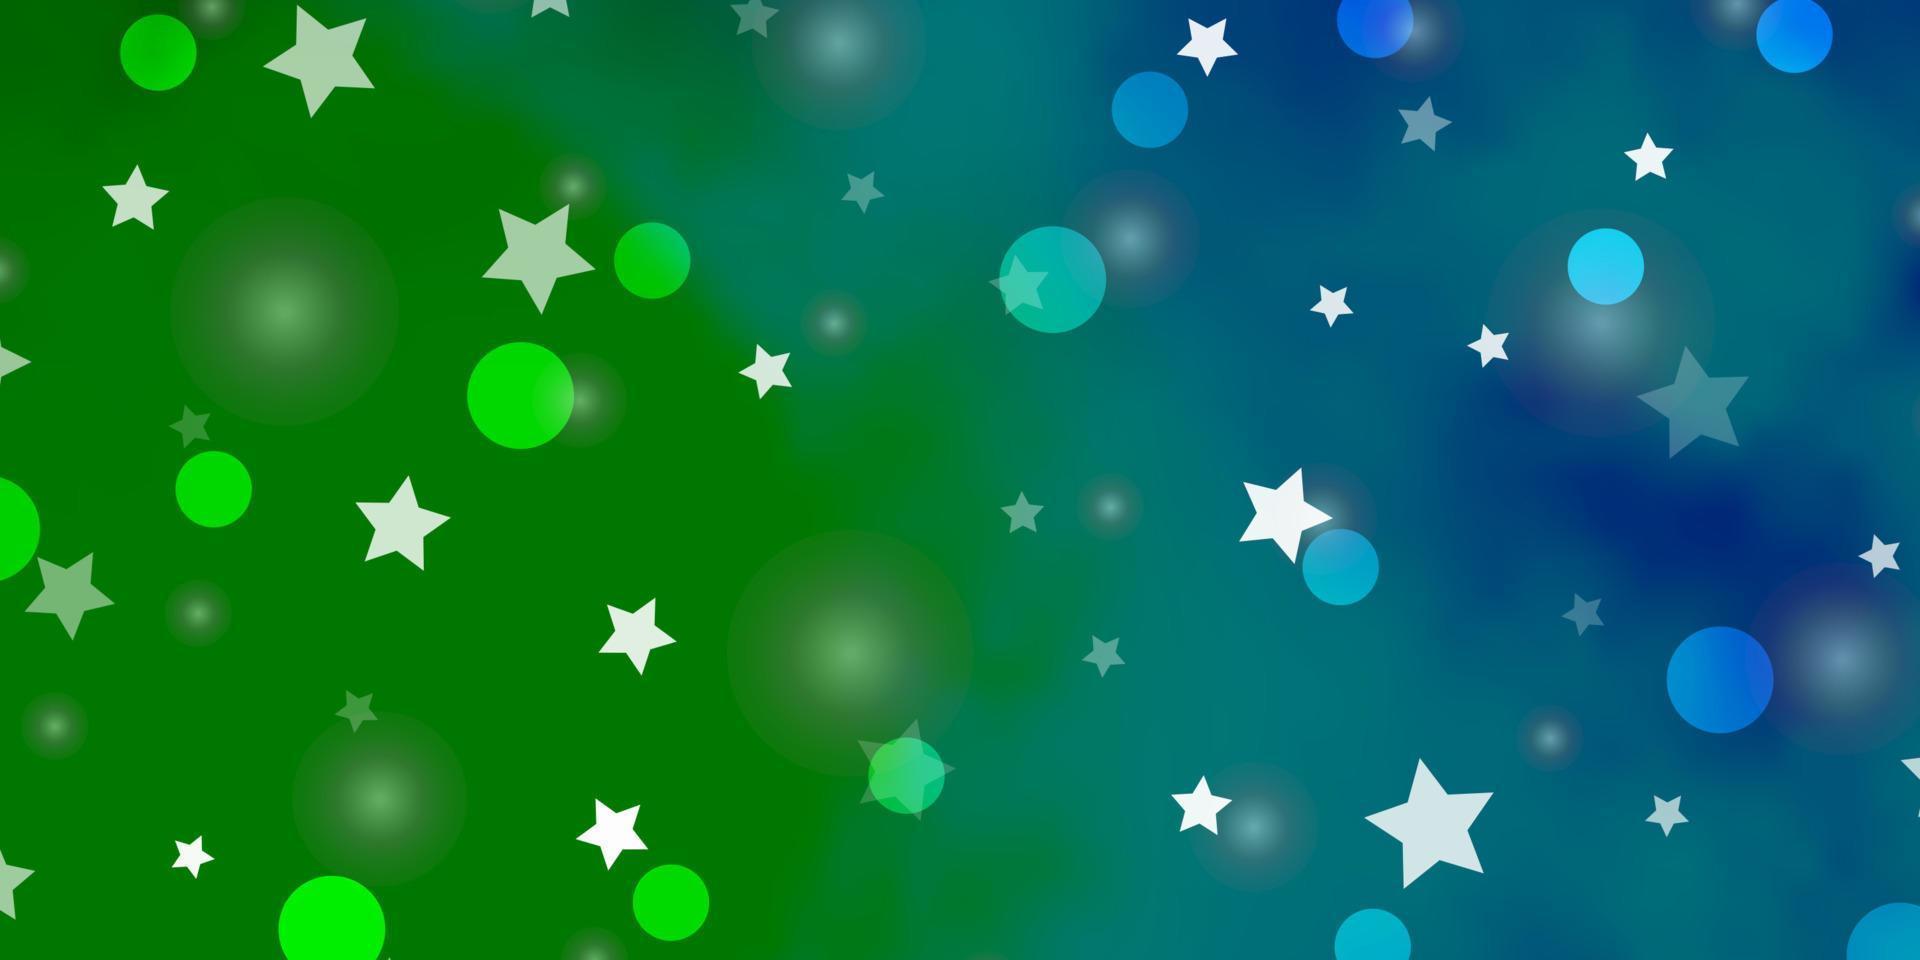 Light Blue, Green vector background with circles, stars.